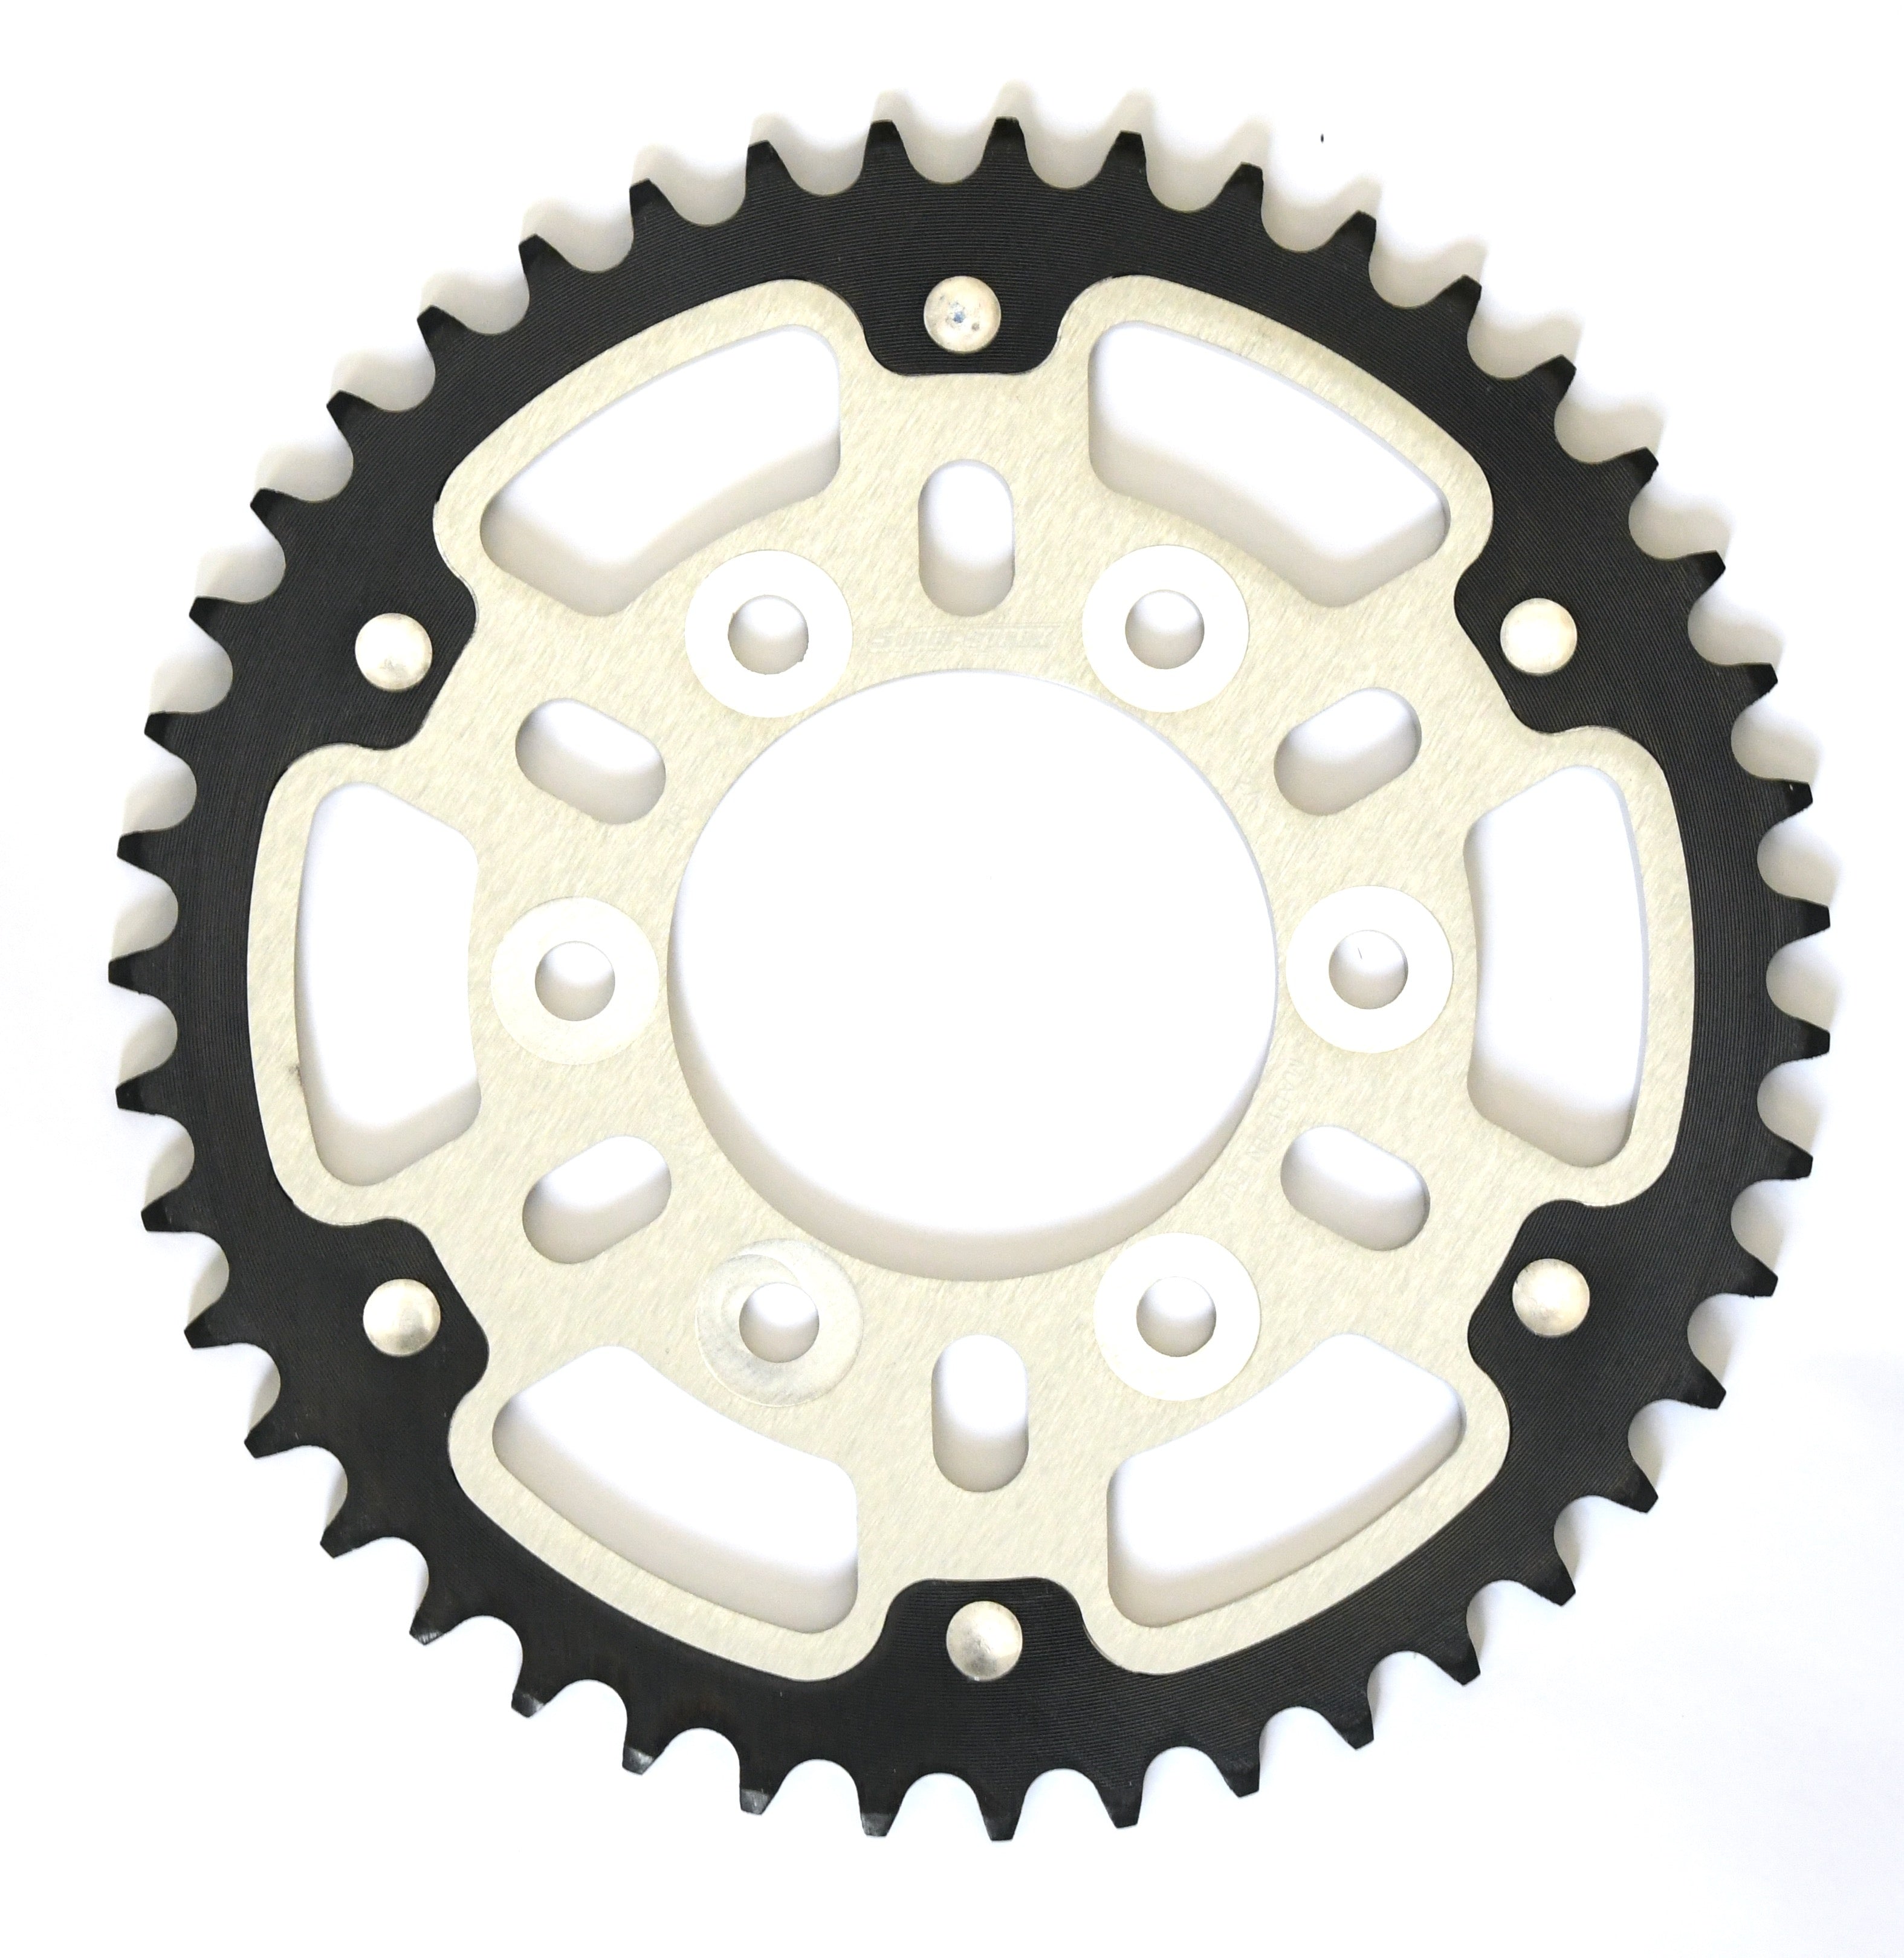 Supersprox Rear Sprocket RST-1489 - Choose Your Gearing